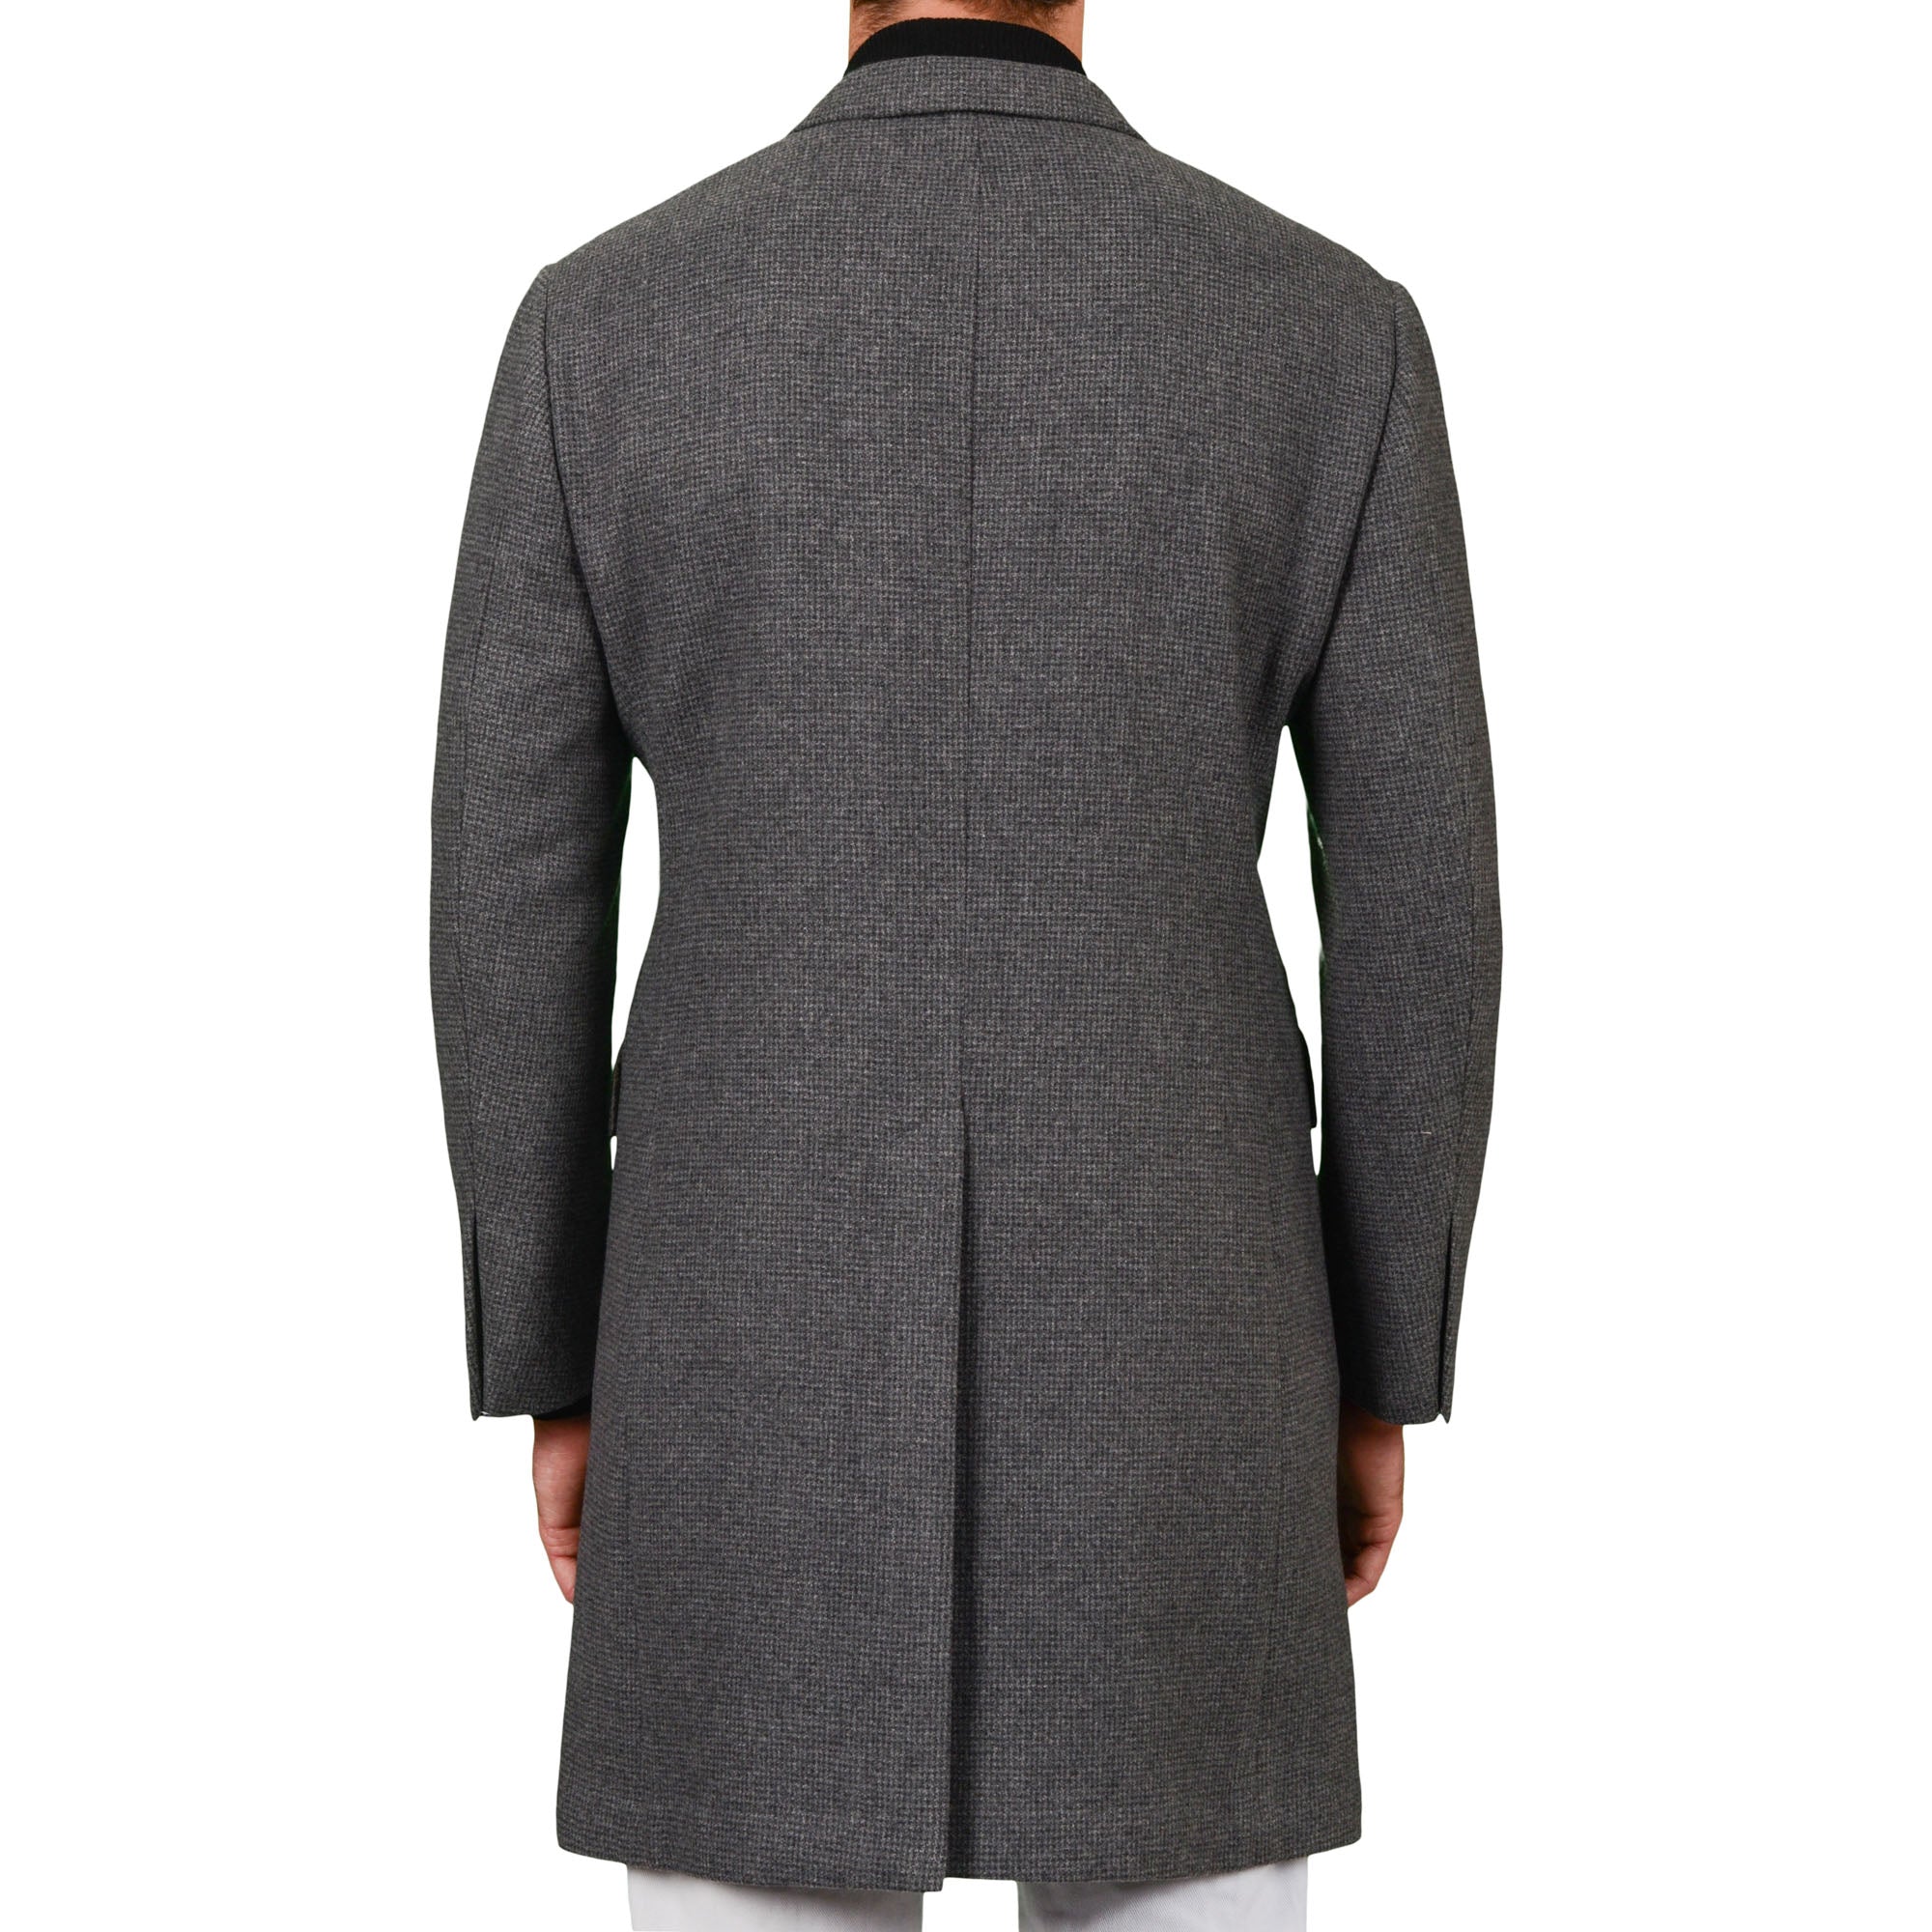 D'AVENZA Roma Handmade Gray Wool-Cashmere Flannel Unlined Coat EU 50 NEW US M